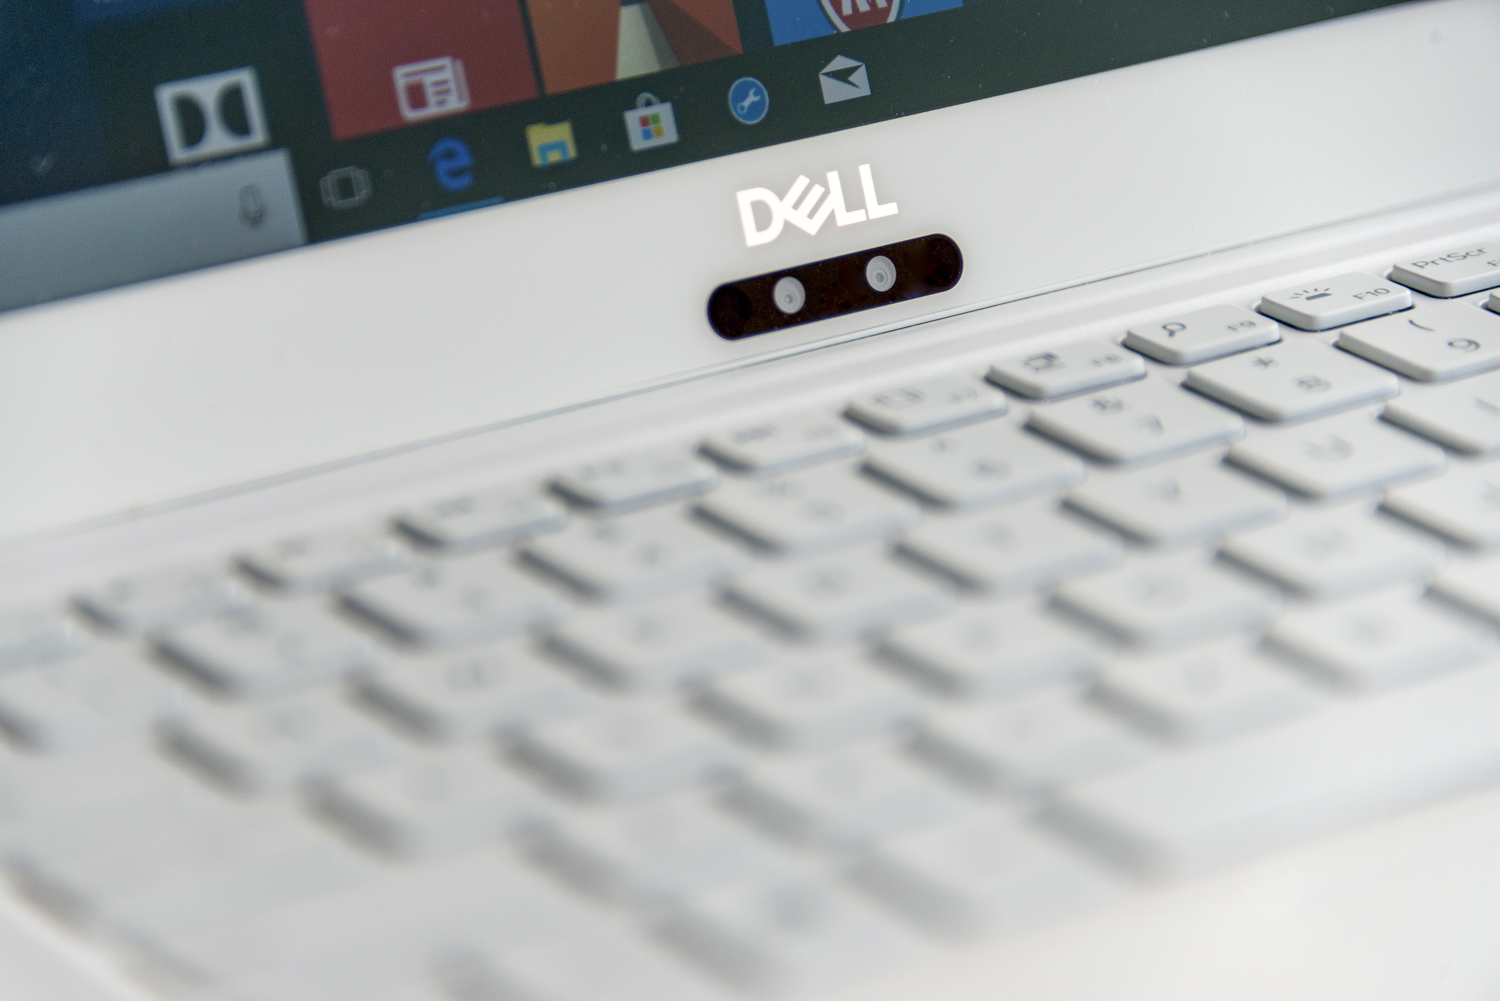 Dell XPS 13 9370 (early 2018) Review: Redesign Of The Original